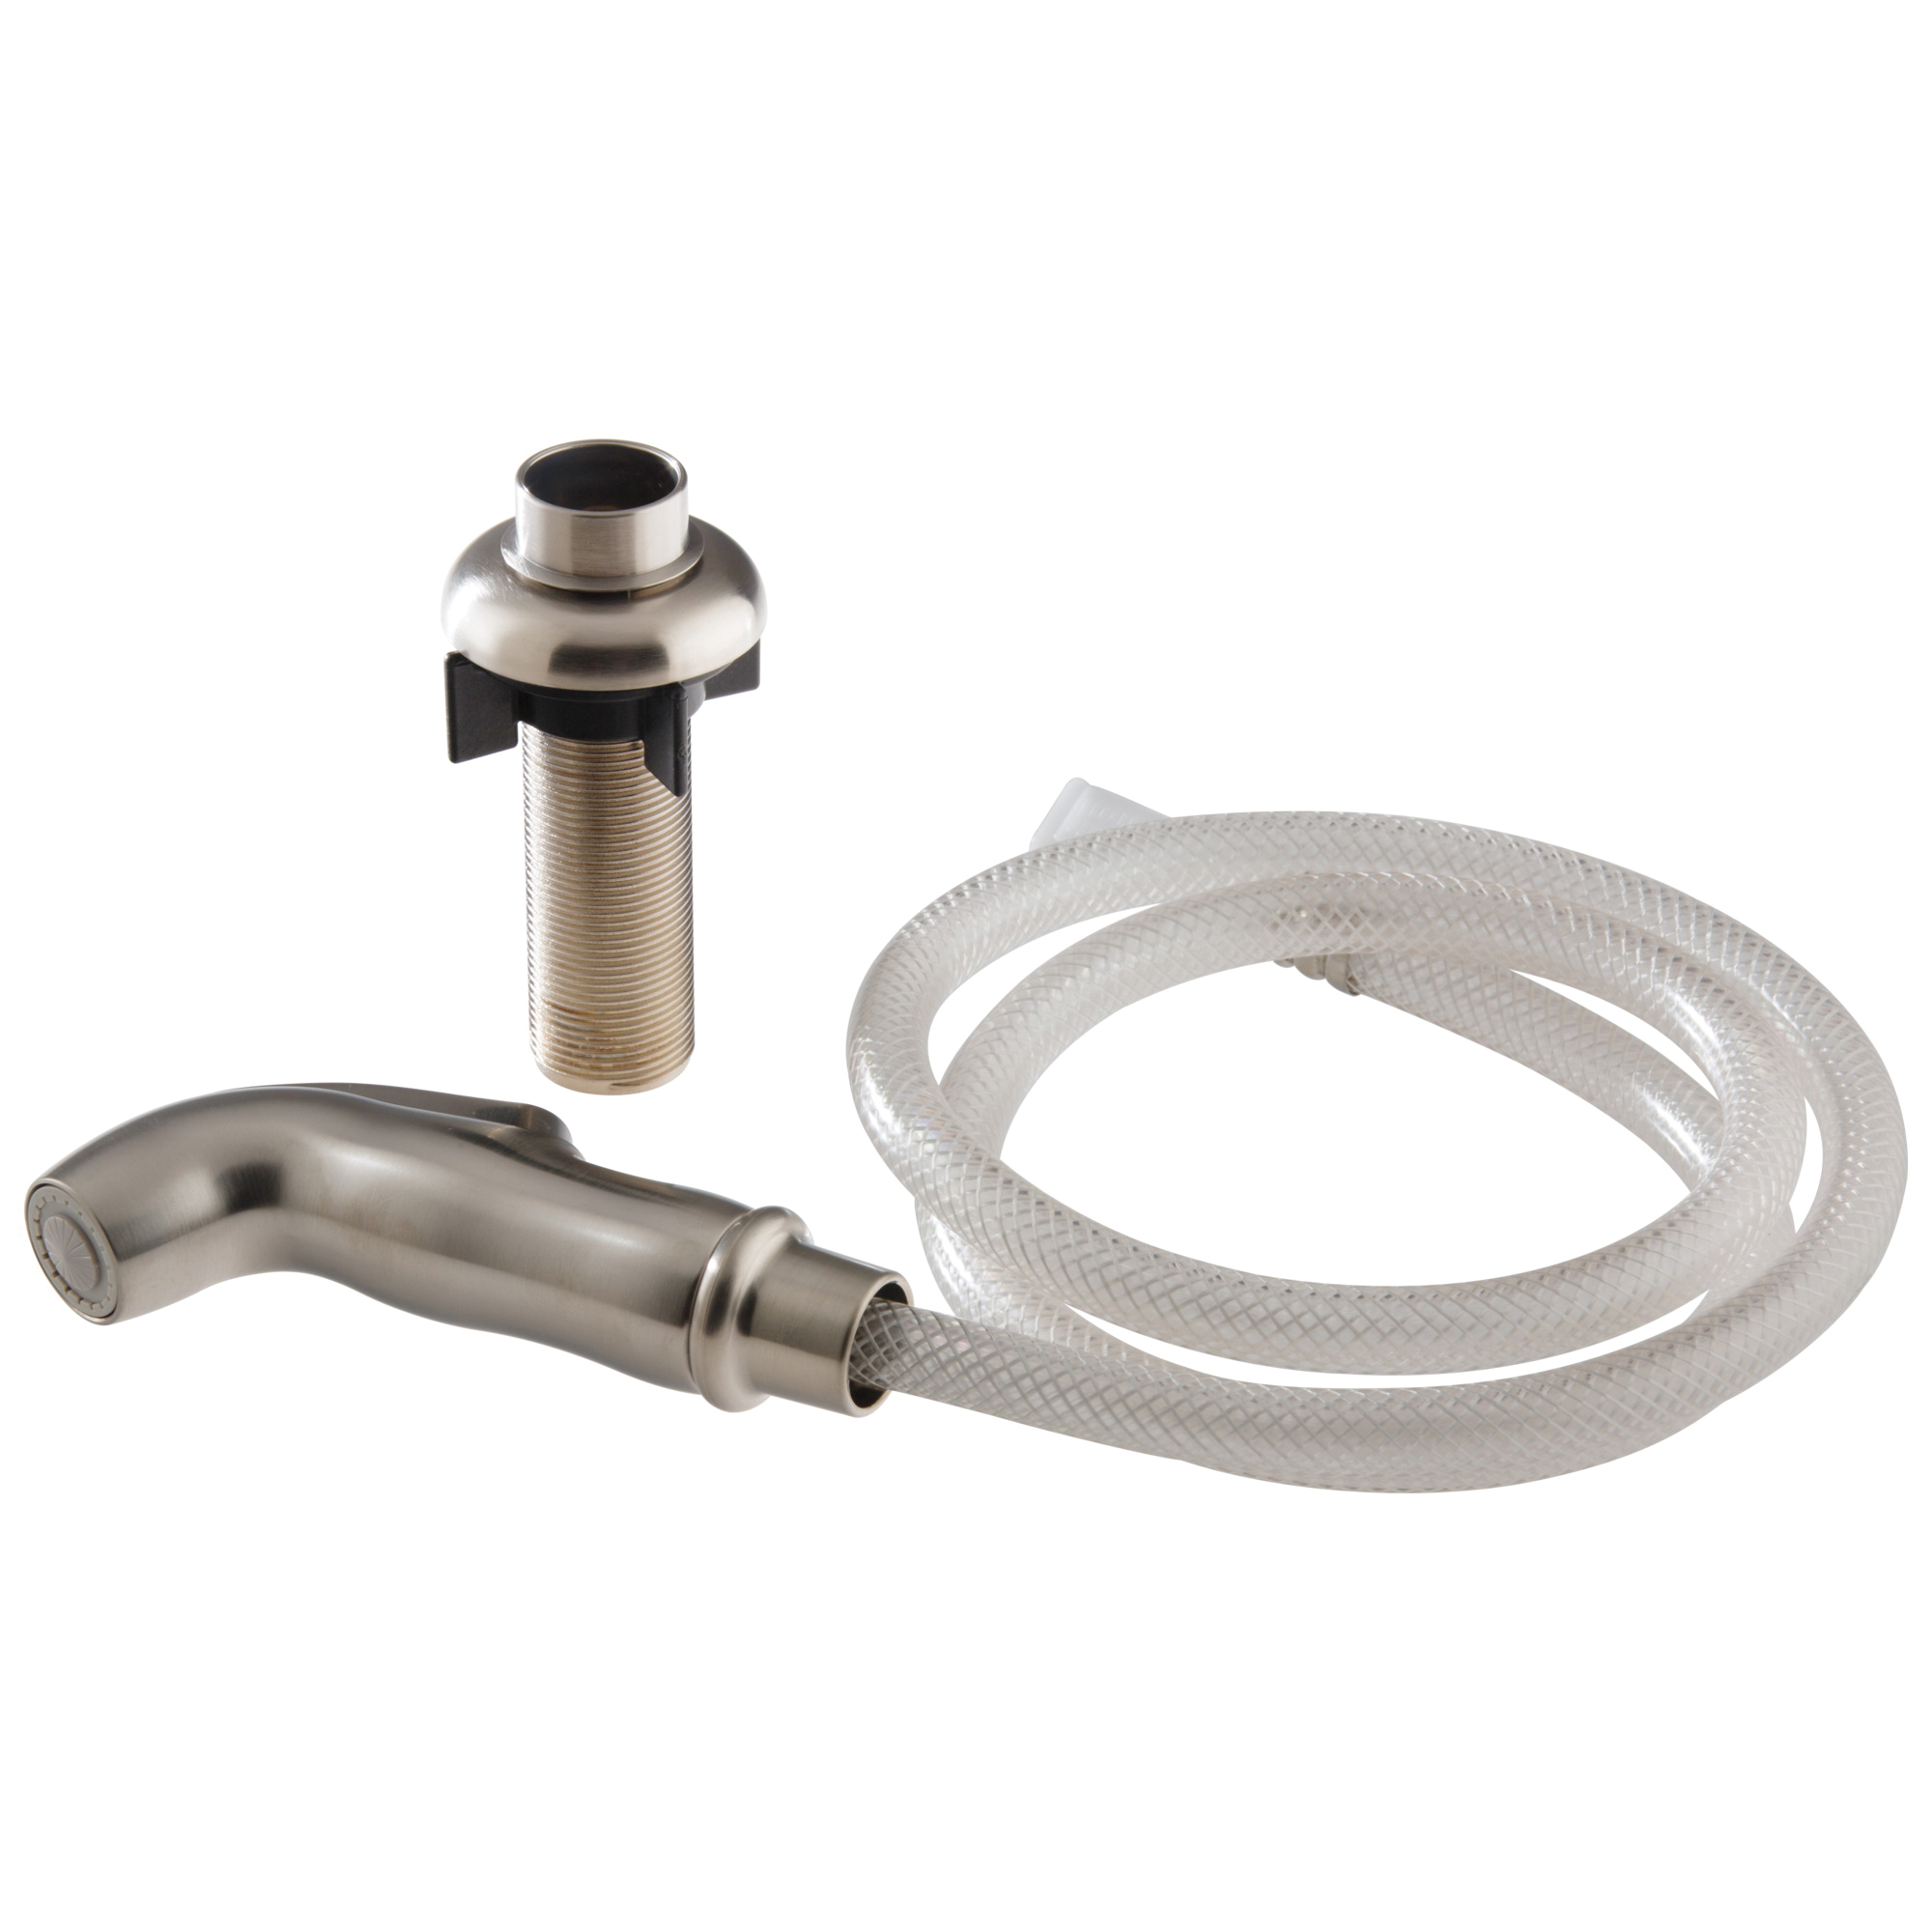 Peerless® RP54807SS Foundations® Spray and Hose Assembly With Spray Support, For Use With Foundation® 10900LF 1-Handle Kitchen Faucet, 48 in Vinyl Spray Hose, Plastic Stainless Steel Head, Import